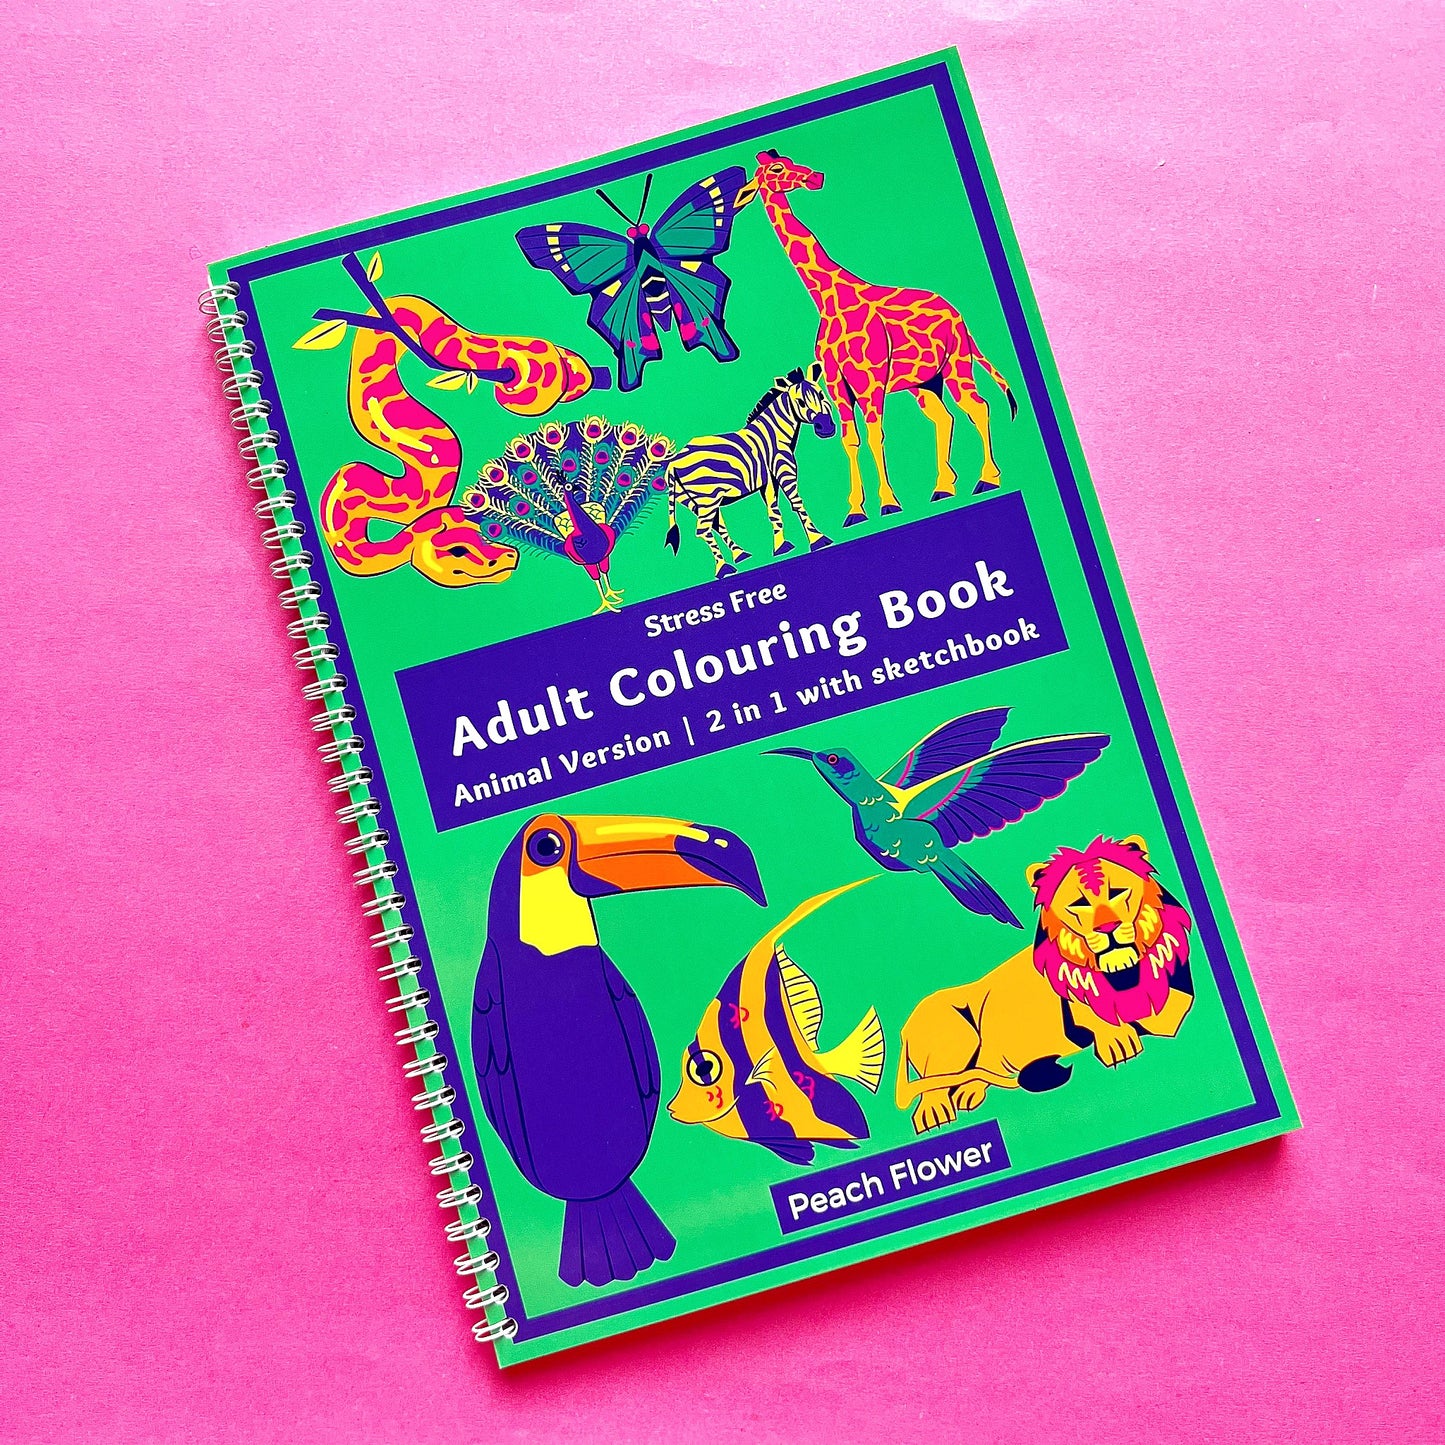 Adult Coloring Book: Animal Version 2 in 1